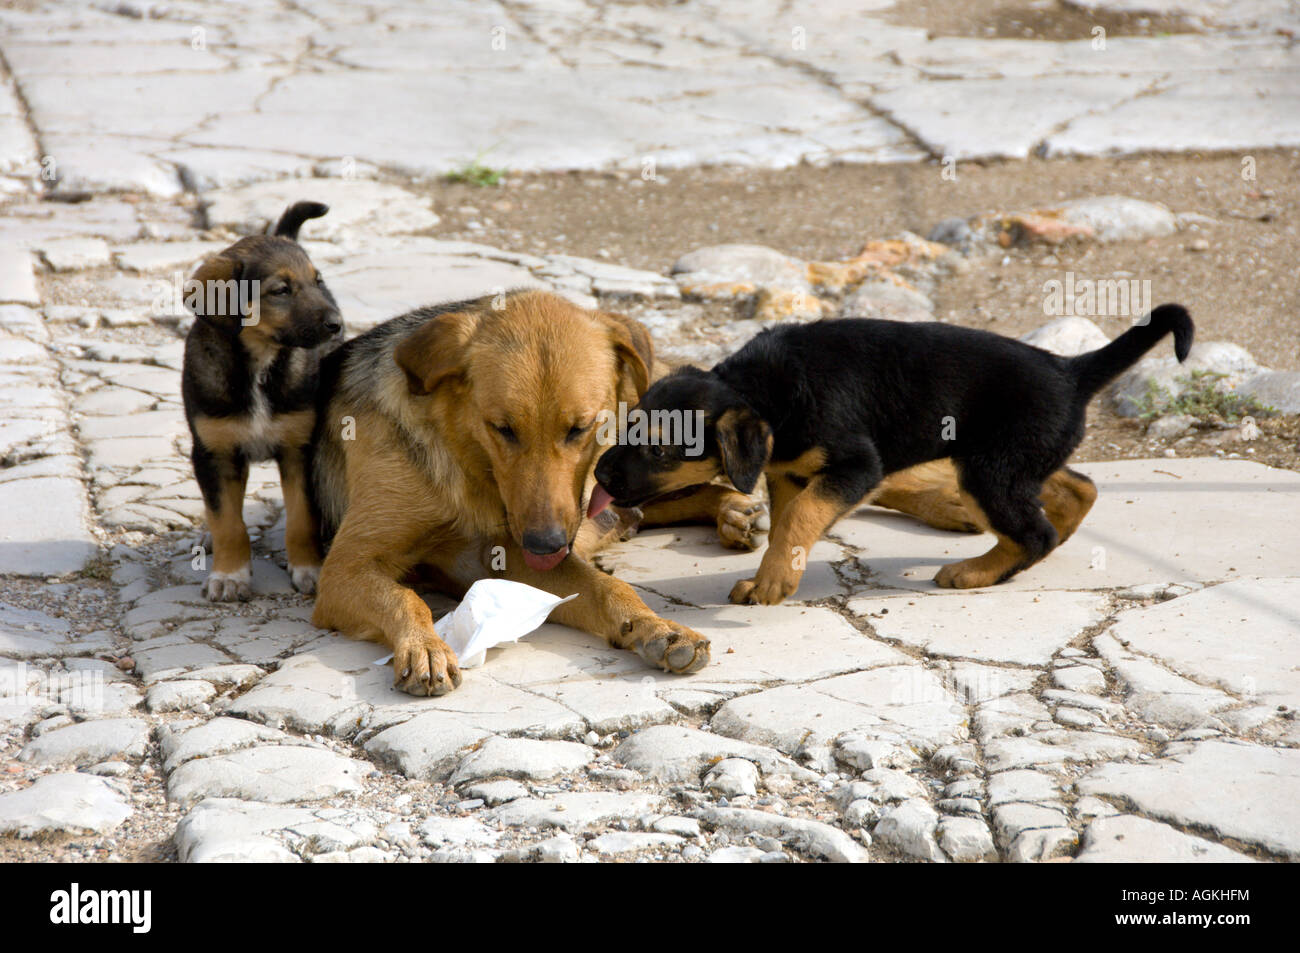 Female dog and her young puppies enjoy the ruins in the ancient city of Corinth Greece Stock Photo